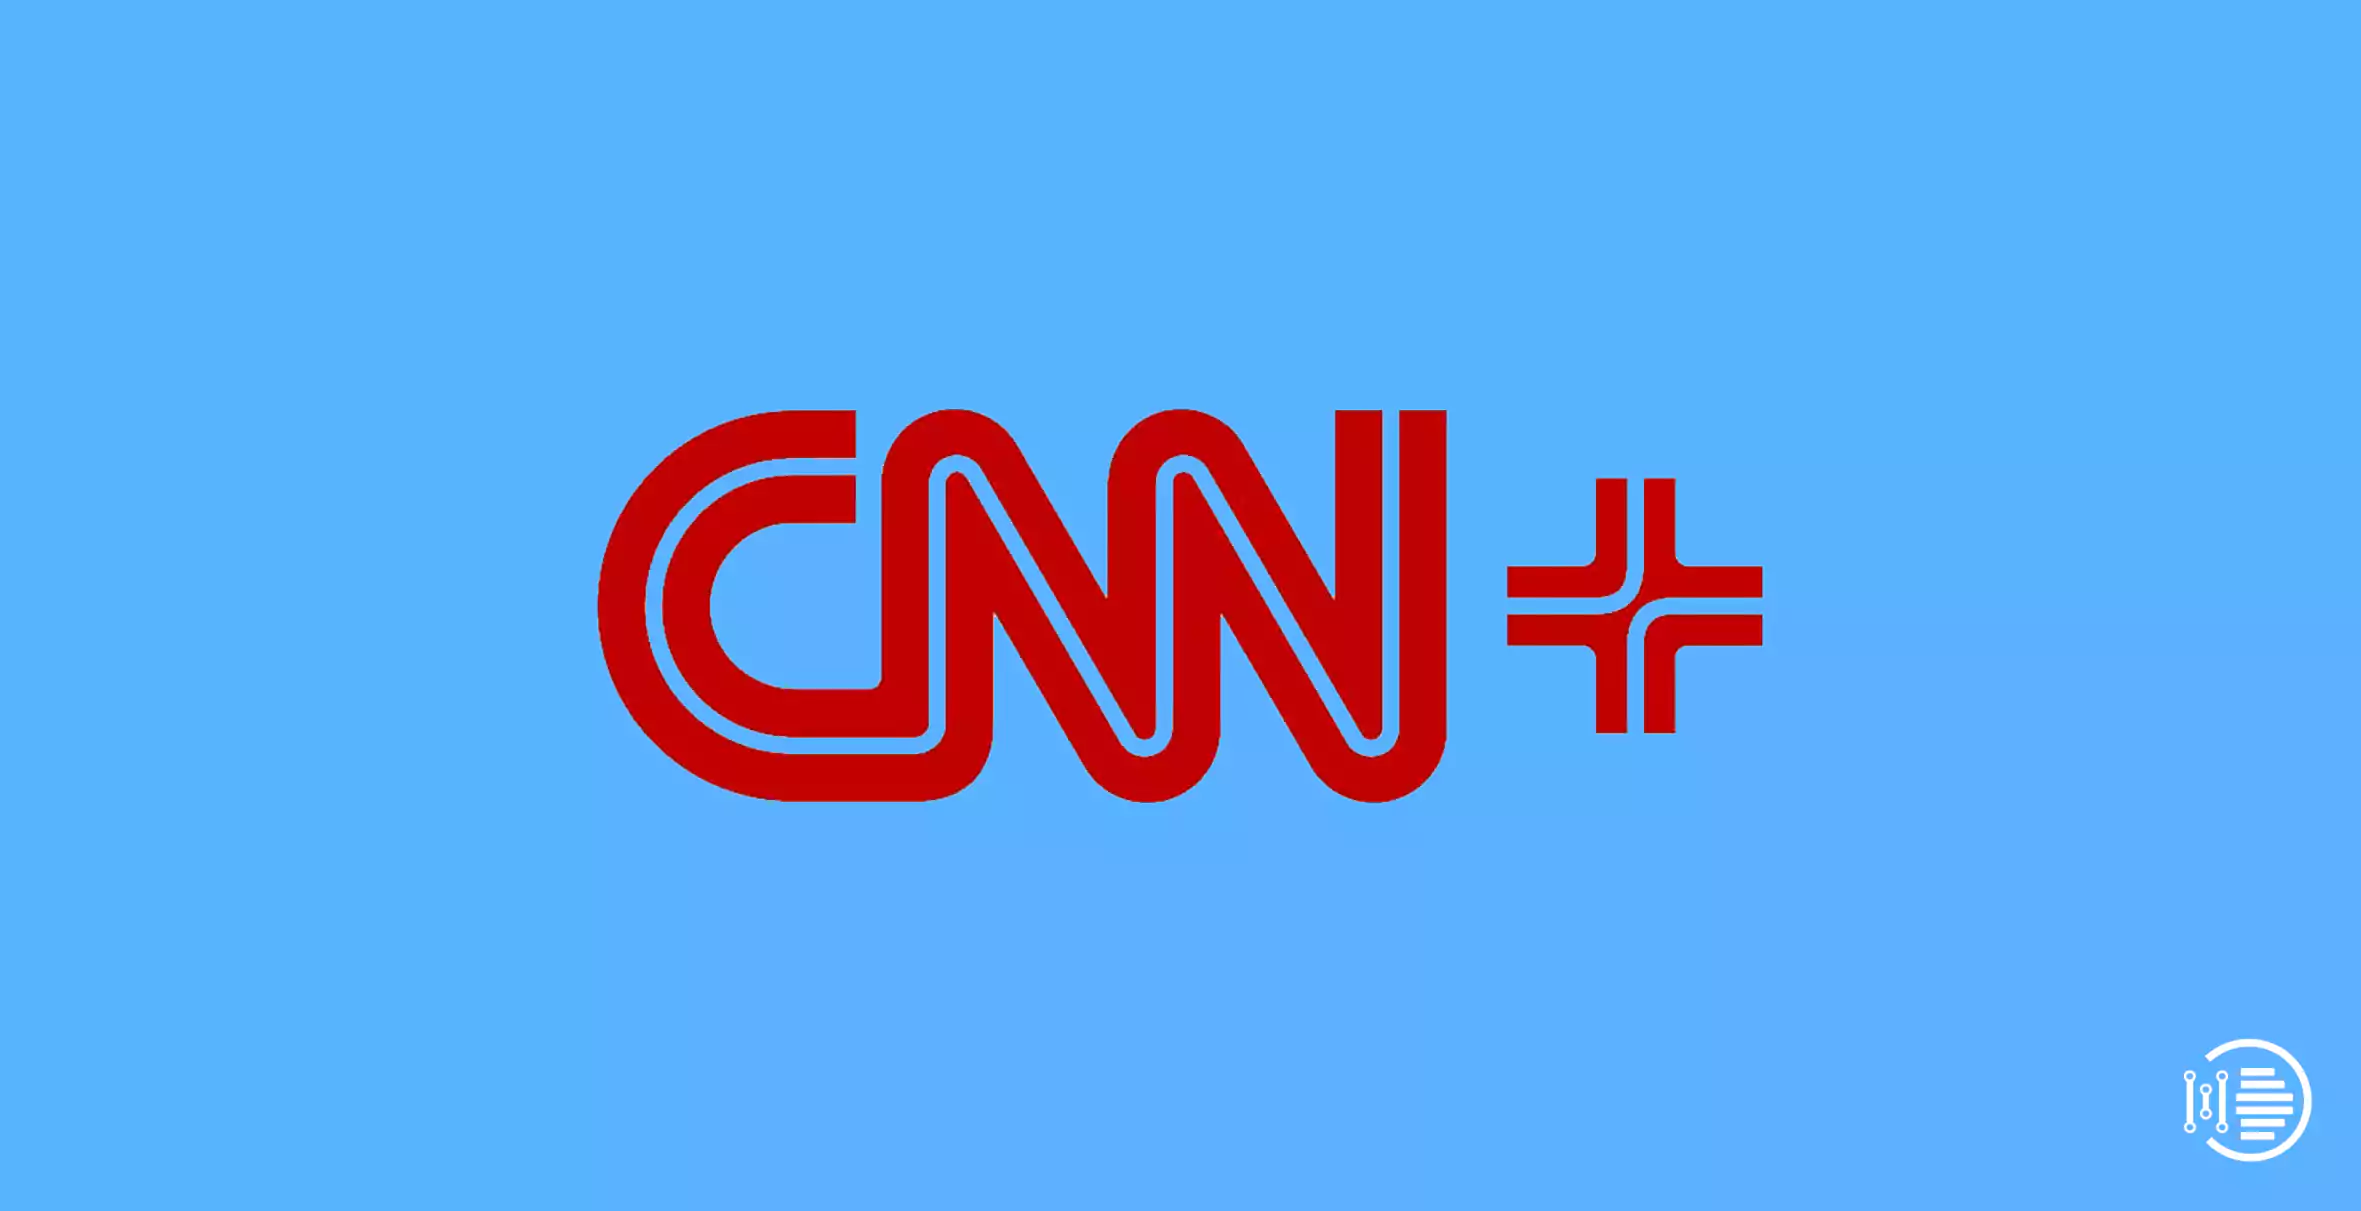 How to Watch CNN Plus Without Cable